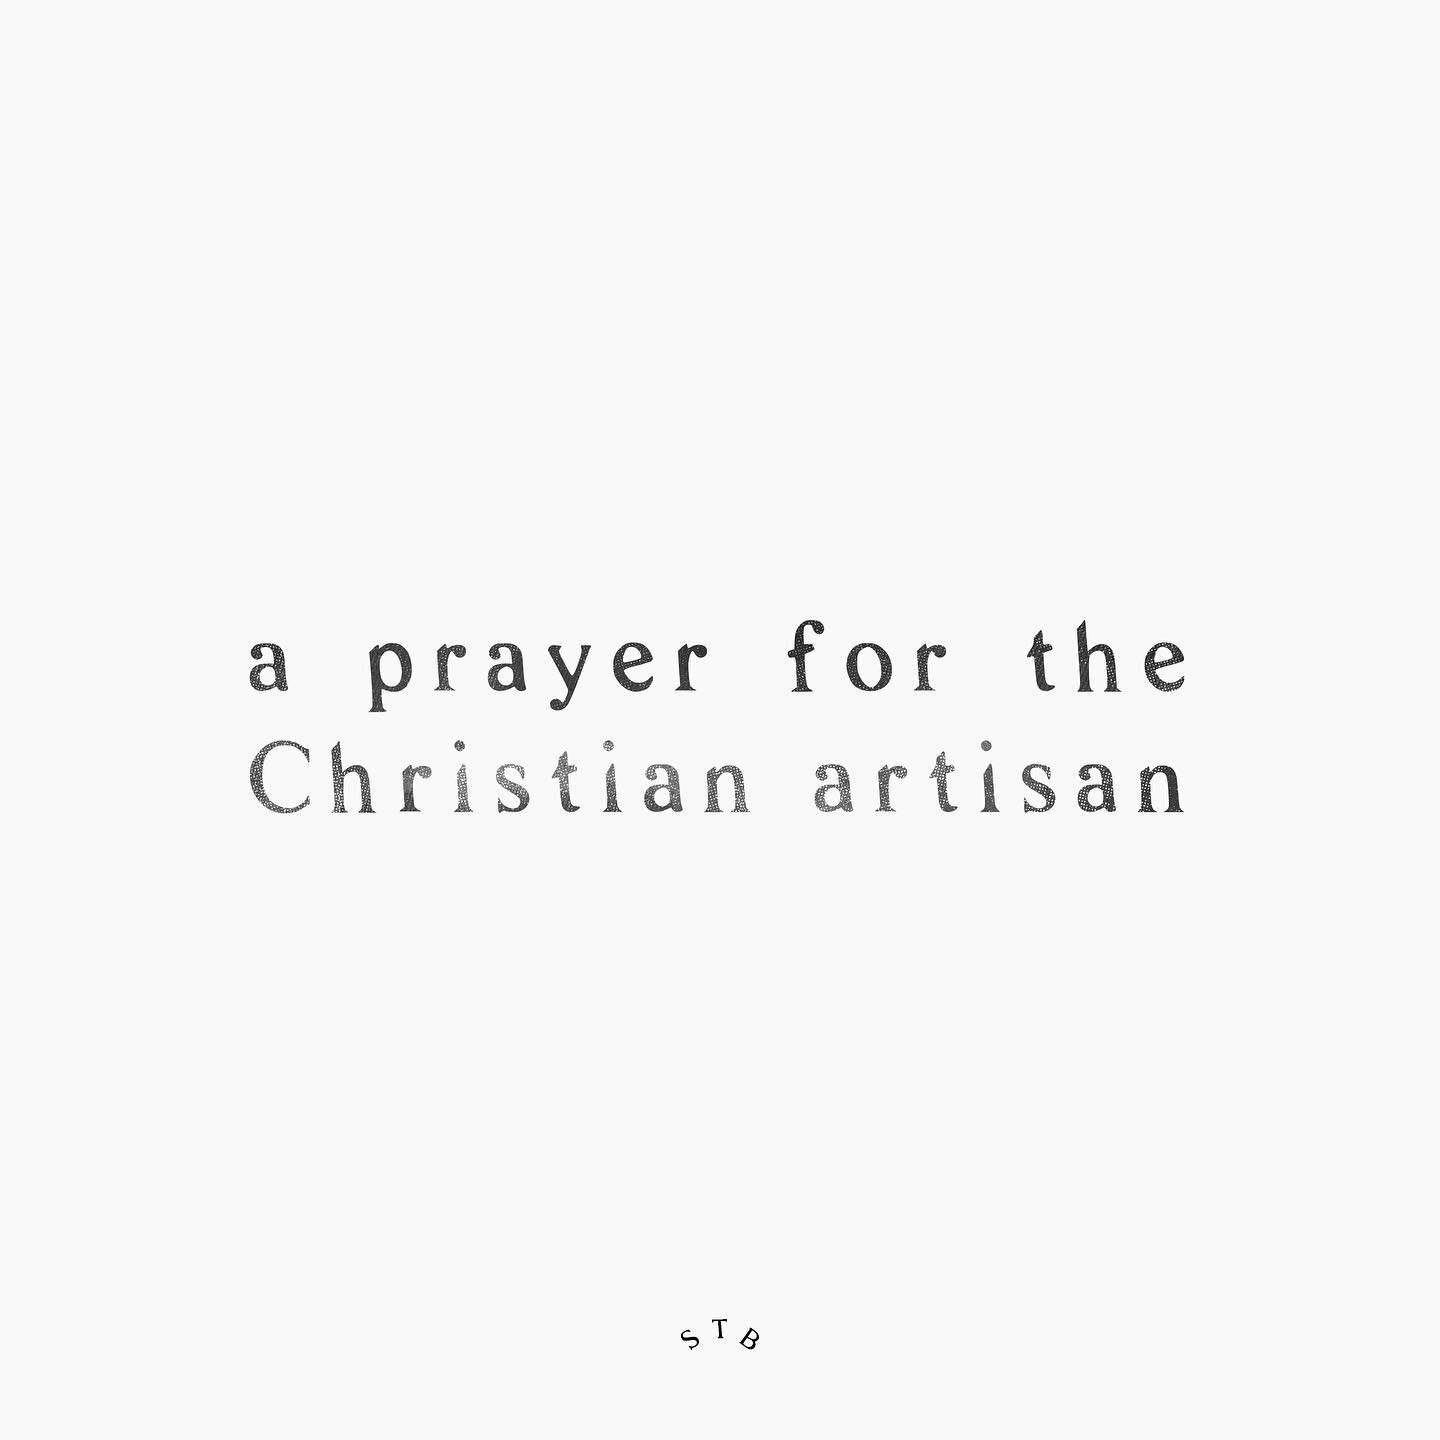 &mdash;A prayer for the Christian artisan&mdash;

Lord,

May I create symbol that tells story.

May I tell story that echoes Story.

That what I create may find its place in the long narrative of humanity and God.

Of infinite and infinite meeting.

